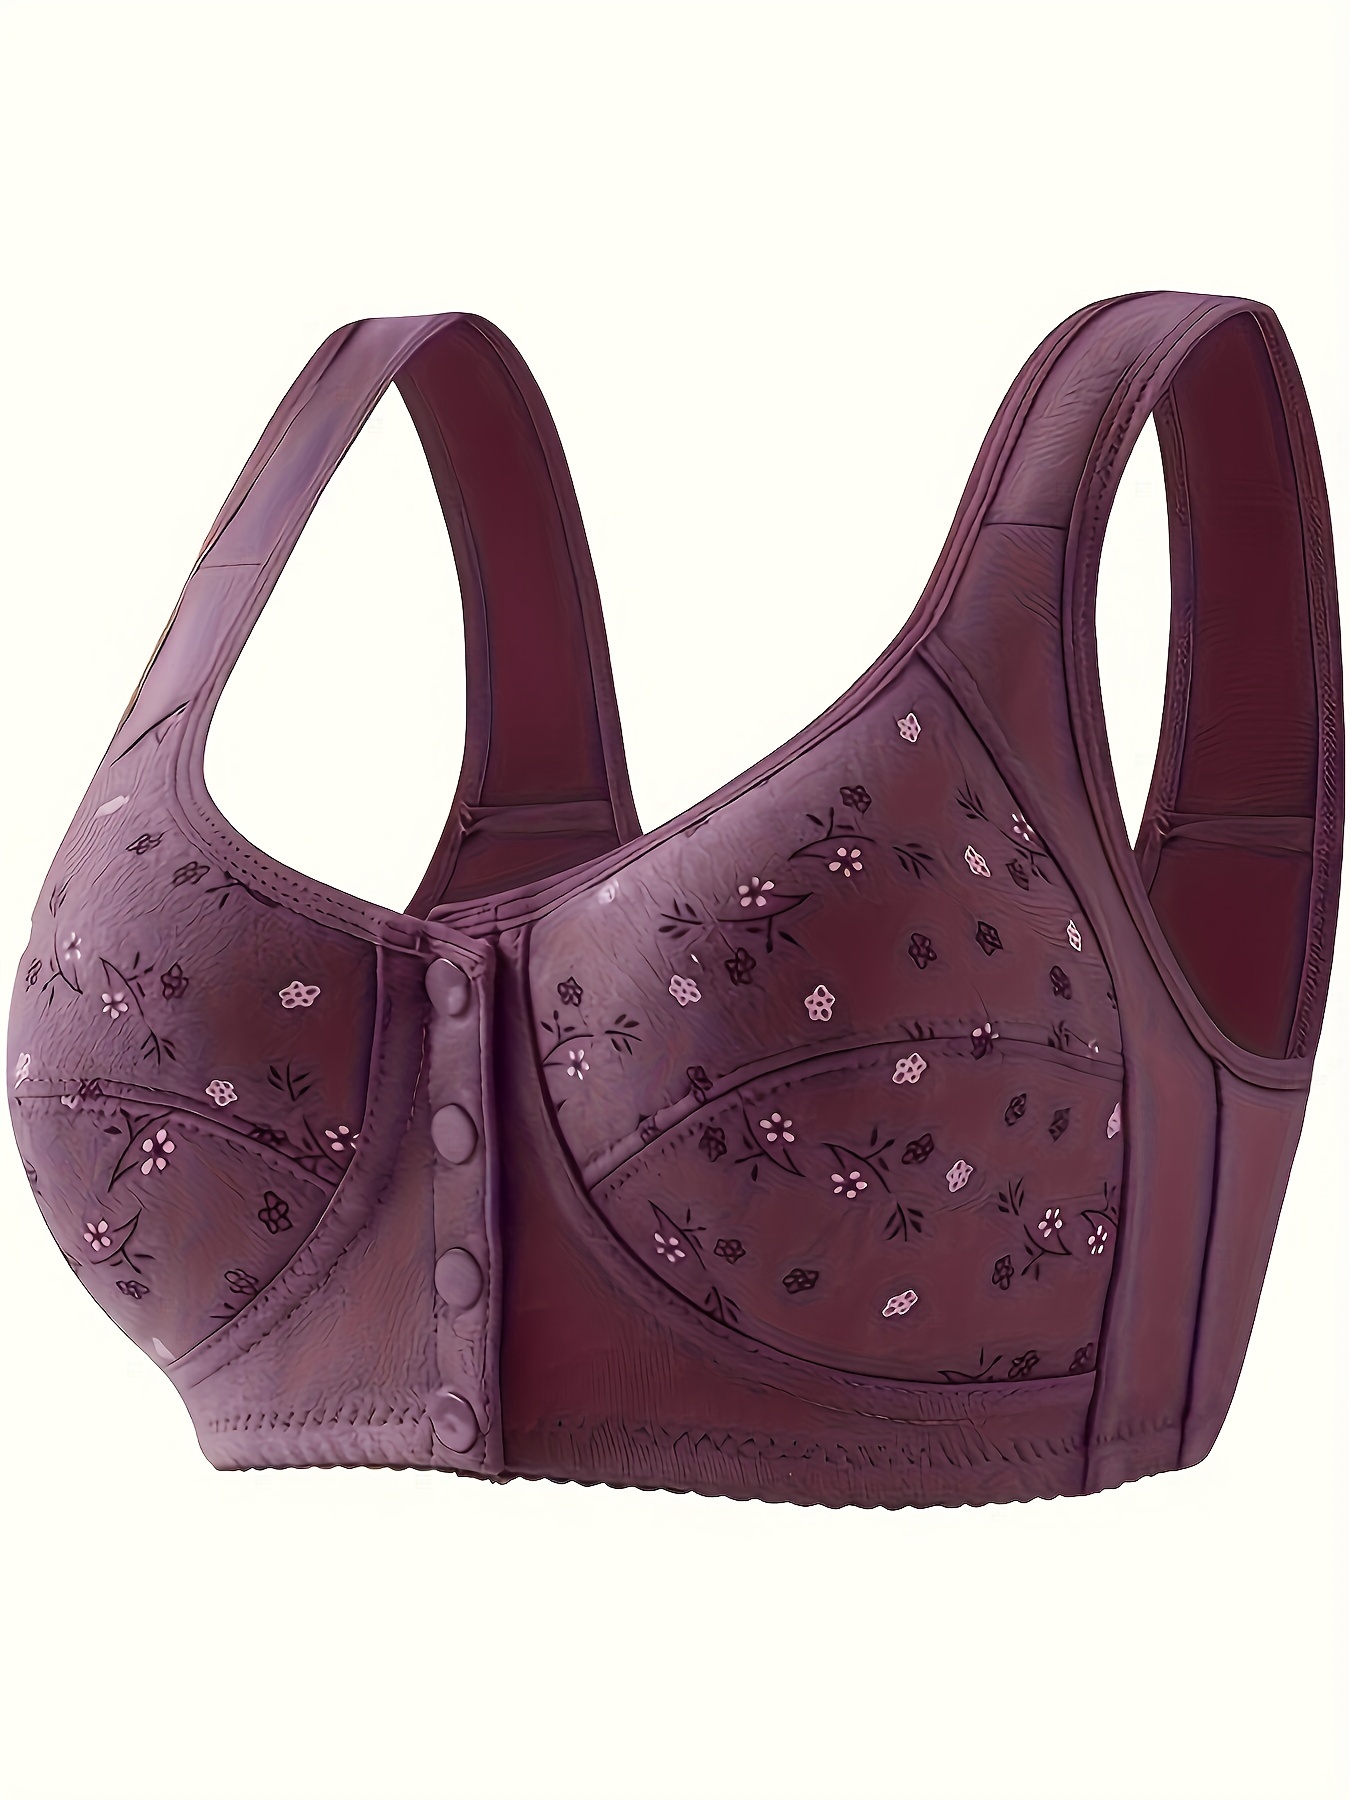 New Fancy And Comfiy Front Open Bra For Women's Pack Of 2